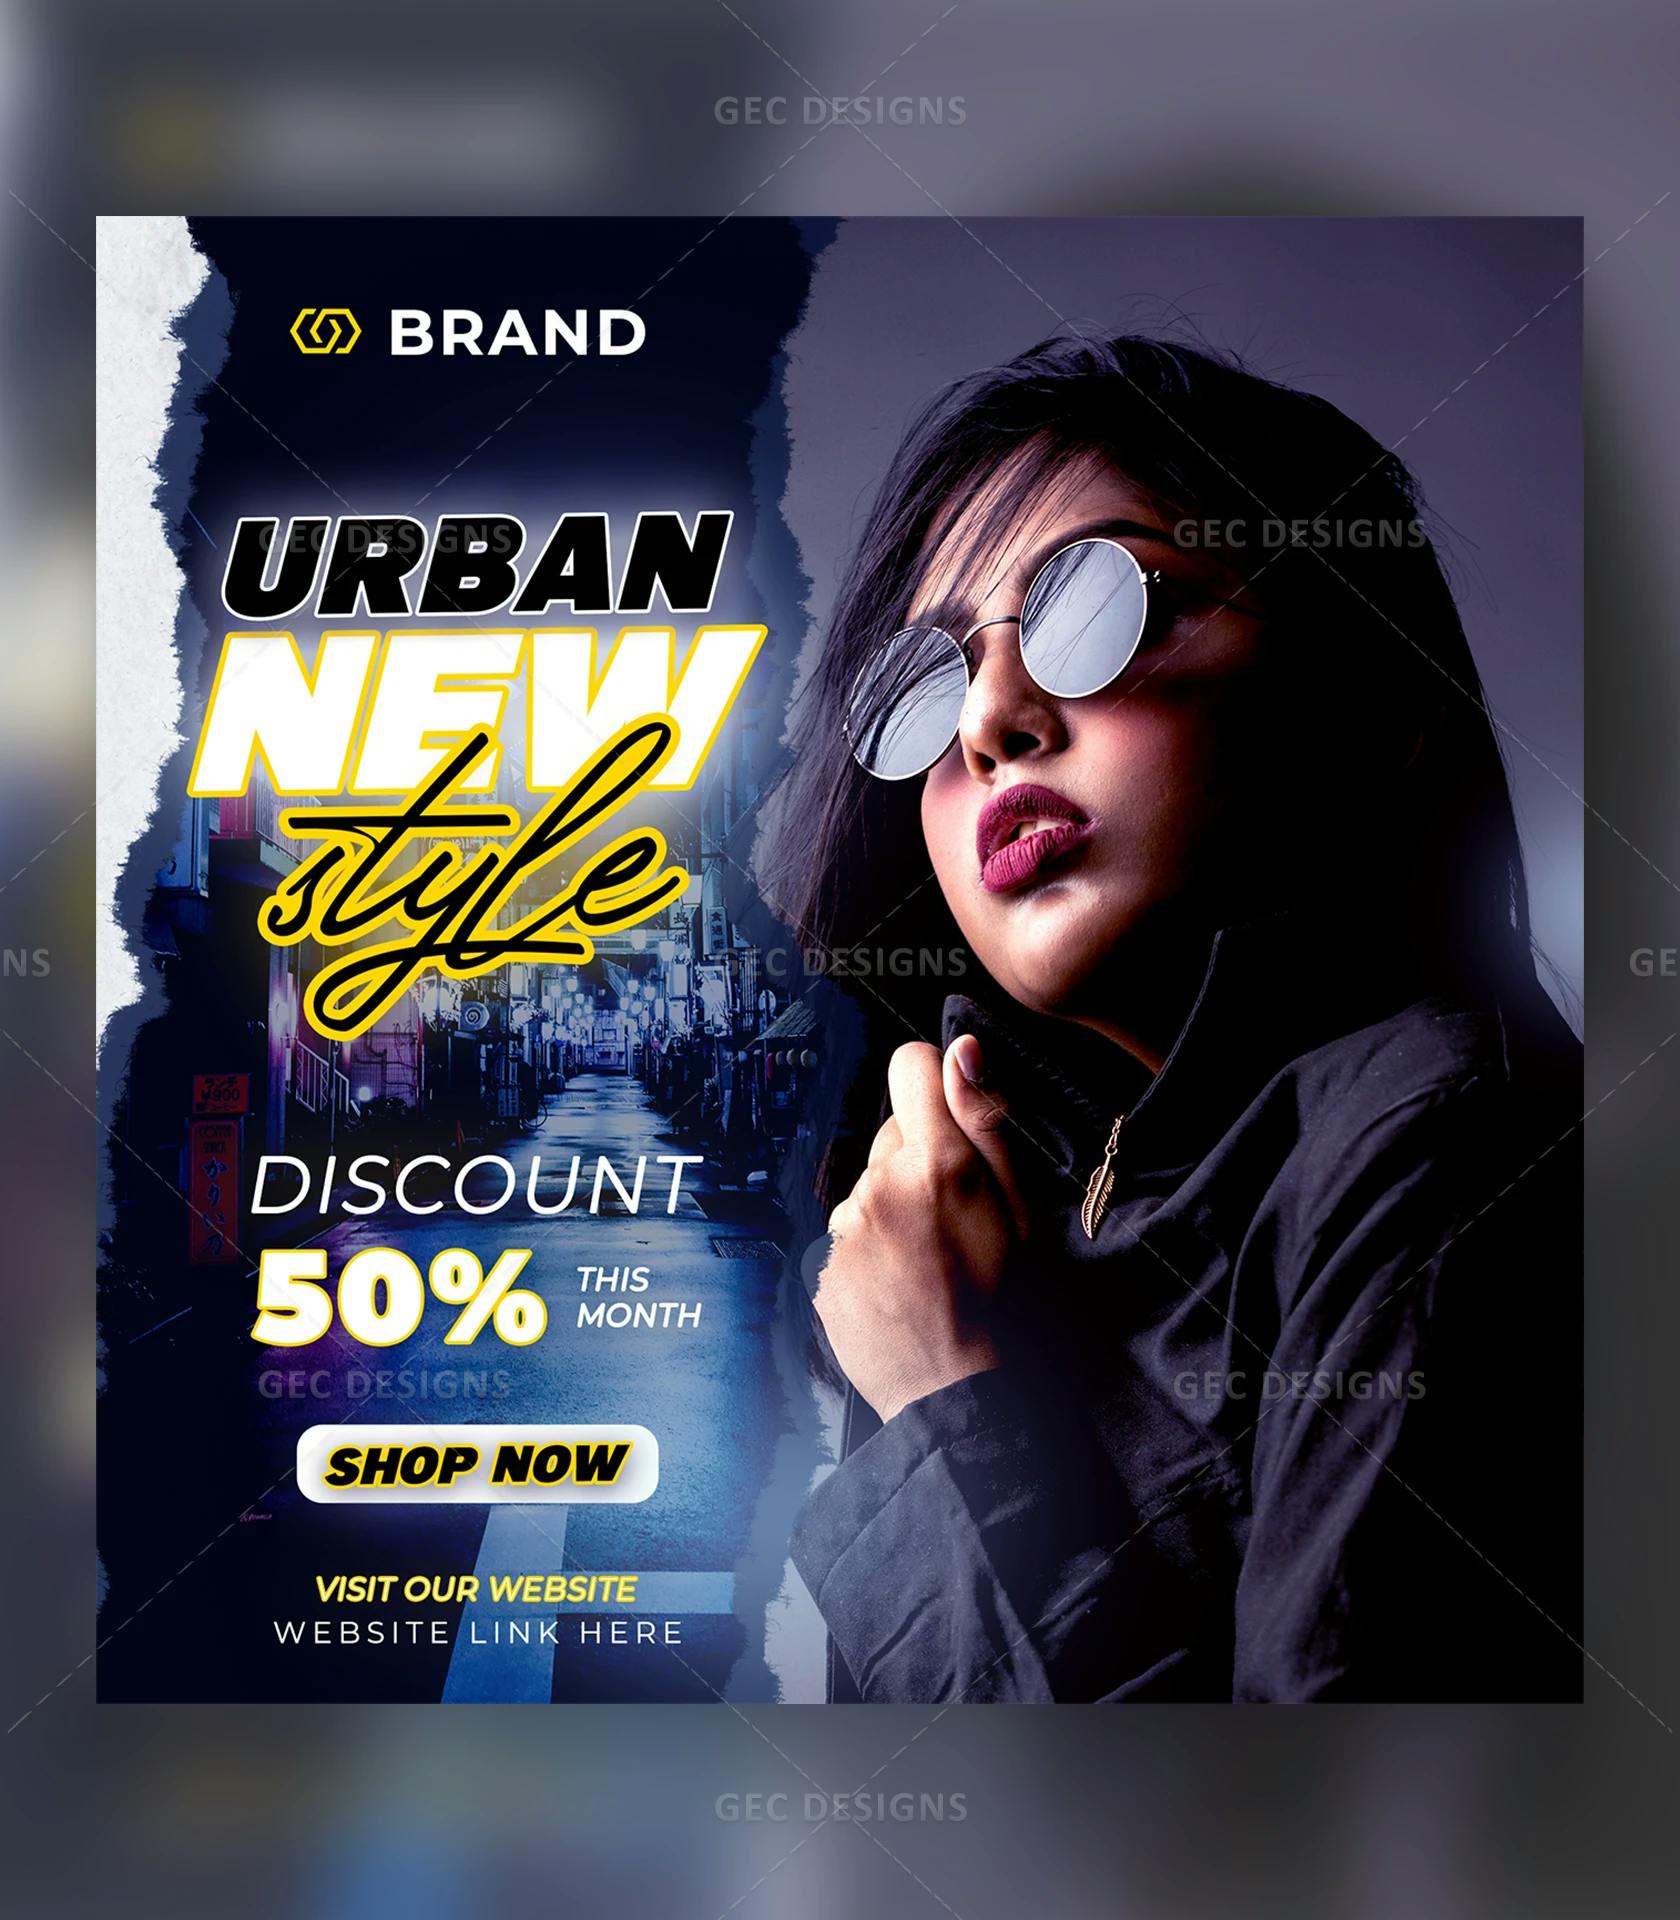 Urban new style fashion shop Instagram poster template